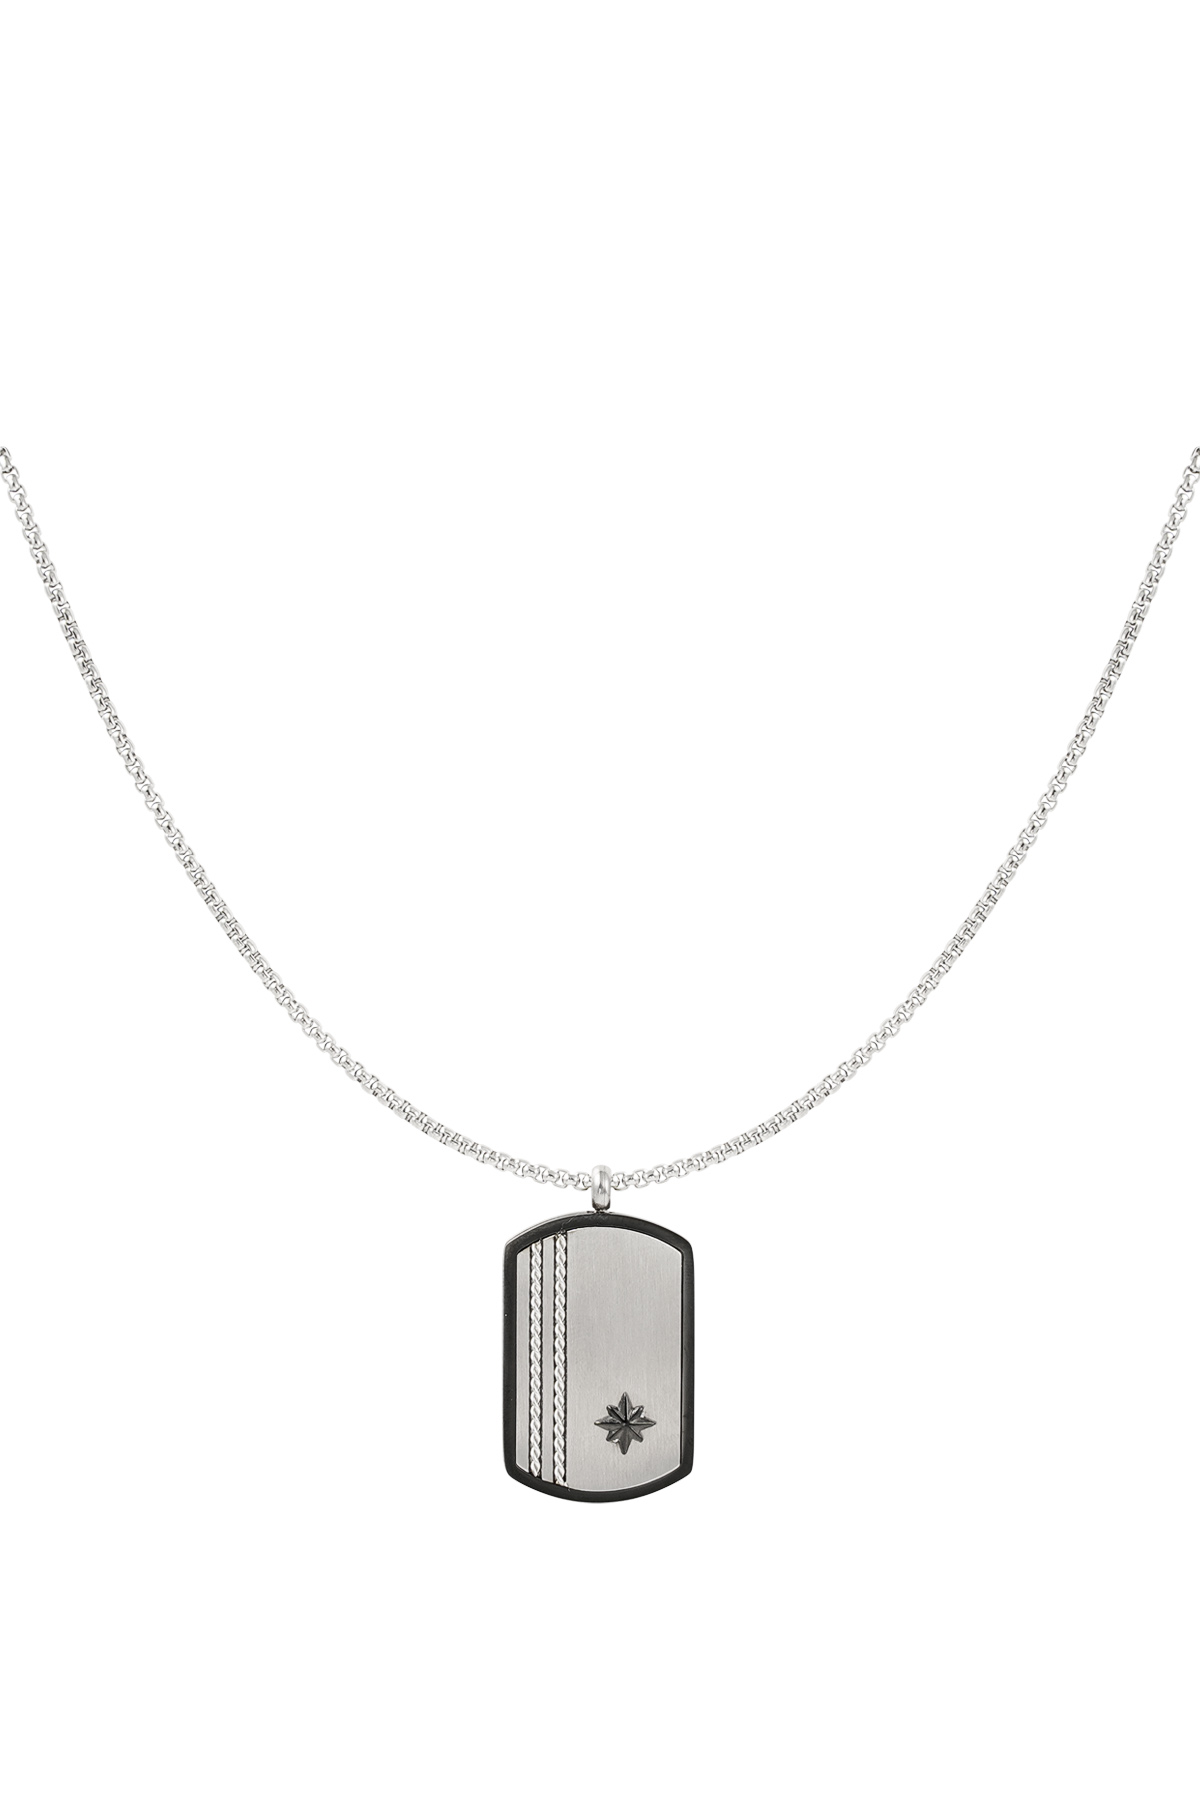 Men's necklace silver charm - silver 